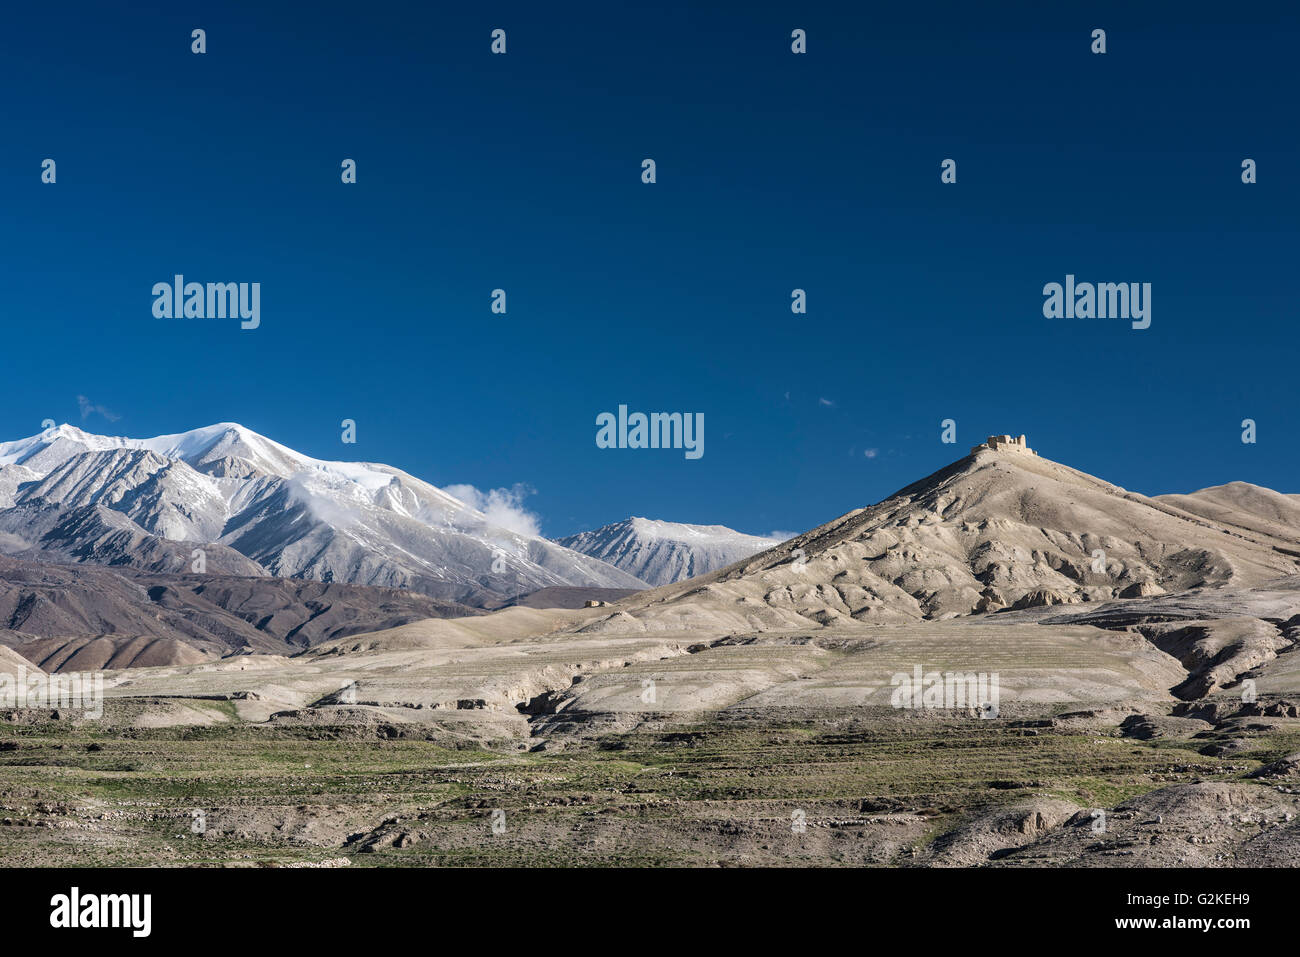 Snowy mountains and ruin, mountain scenery in Lo Manthang, kingdom of Mustang, Upper Mustang, Himalaya, Nepal Stock Photo